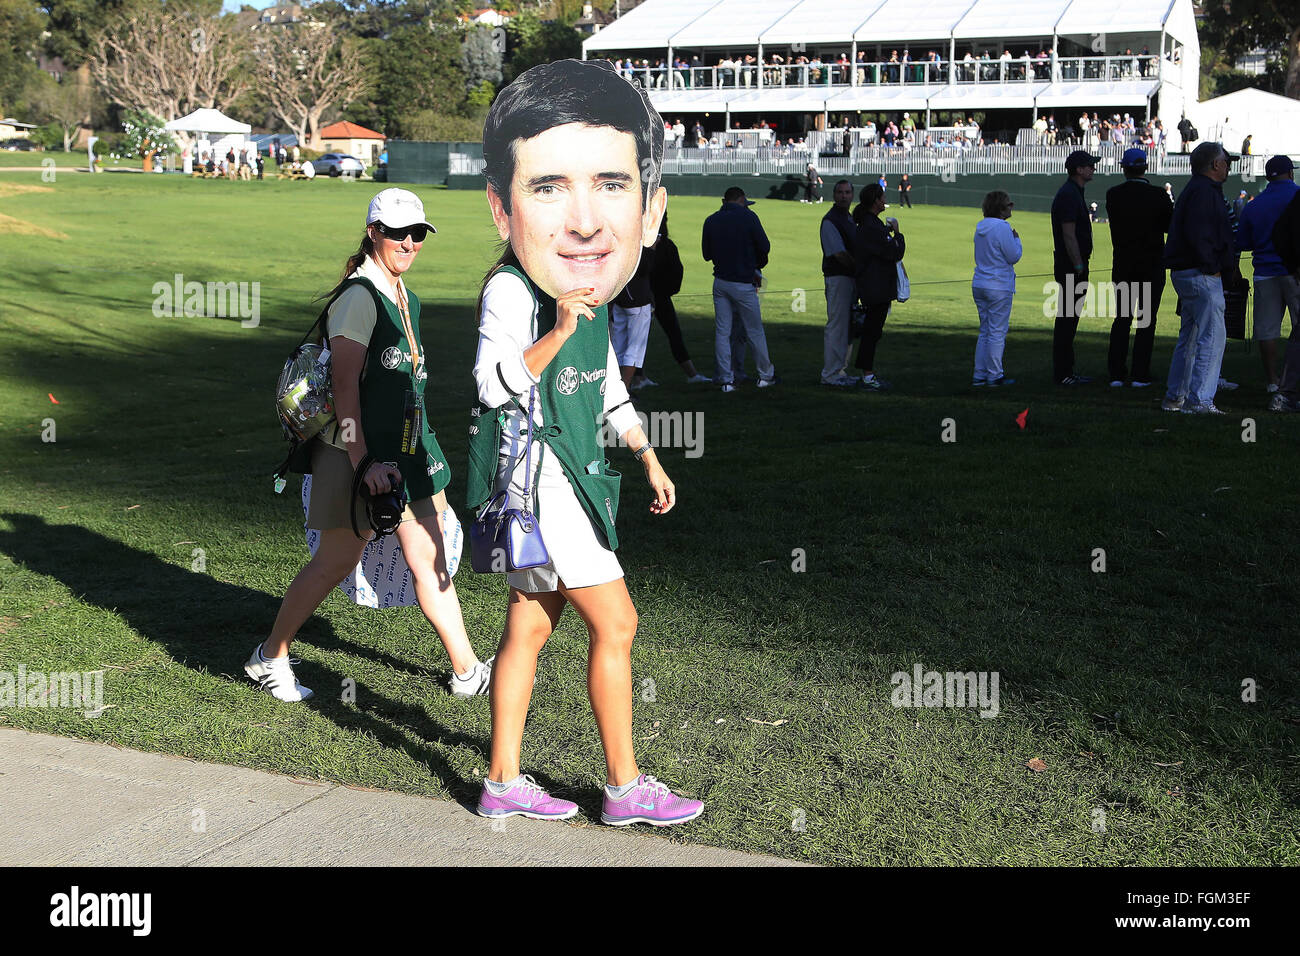 Pacific Palisades, CA, USA. 19th Feb, 2016. February 19, 2016: Bubba Watson FatHead during the second round of the Northern Trust Open, Pacific Palisades, CA. Michael Zito/ESW/CSM/Alamy Live News Stock Photo